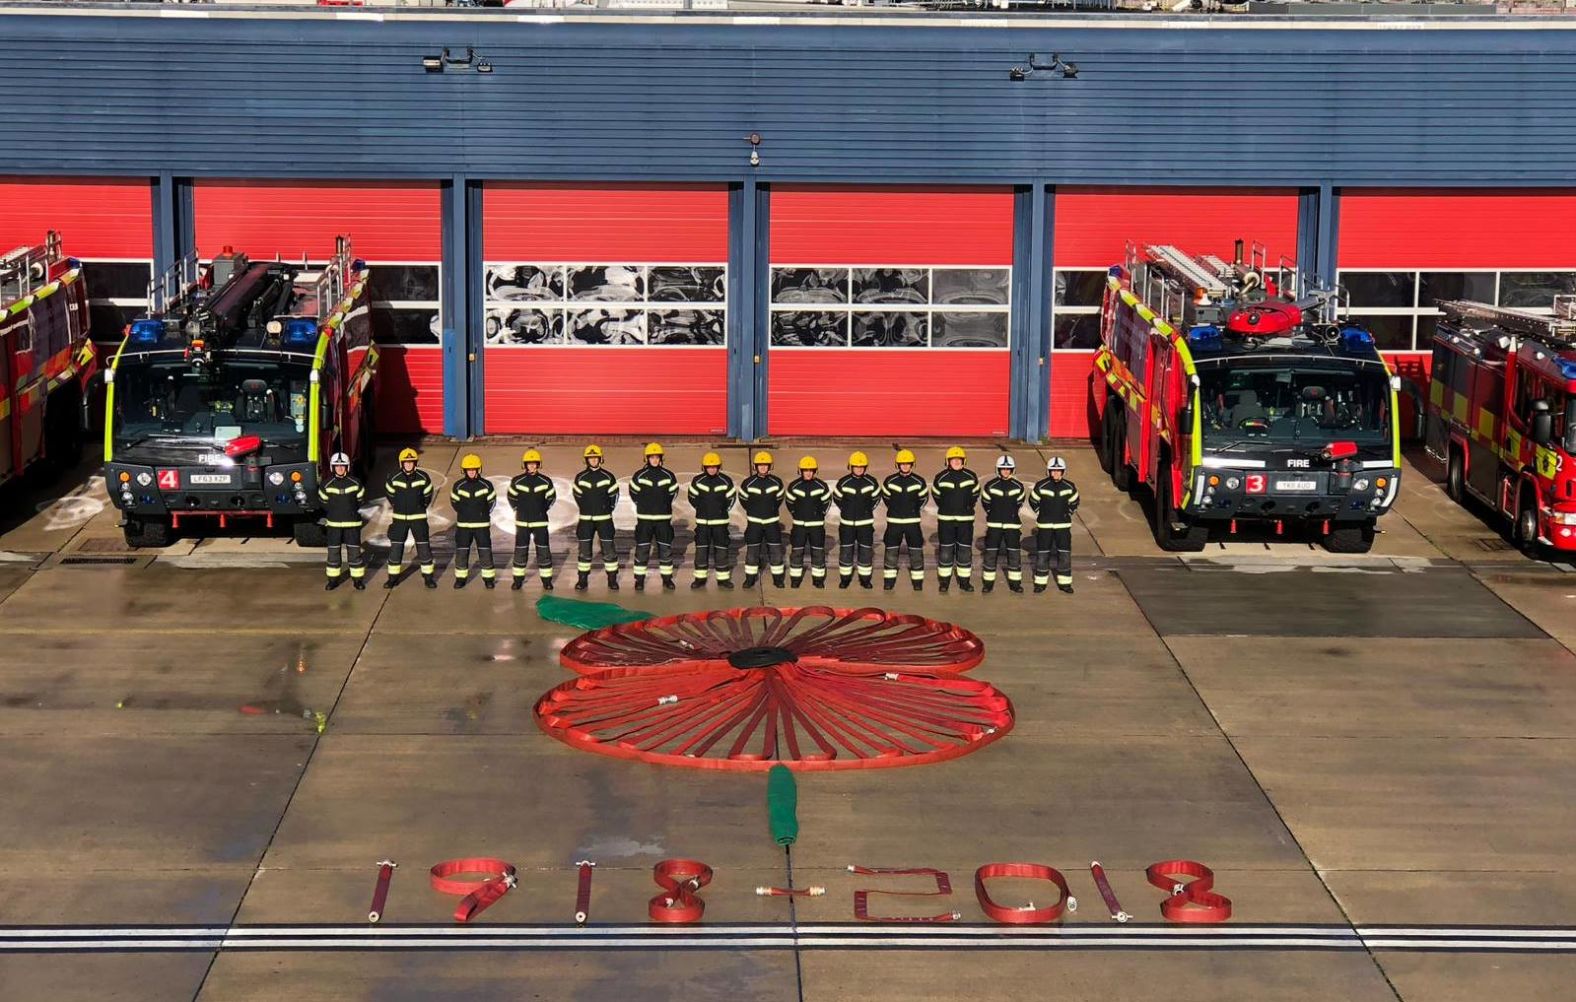 The Fire Service at London's Gatwick Airport shares a special poppy Sunday.